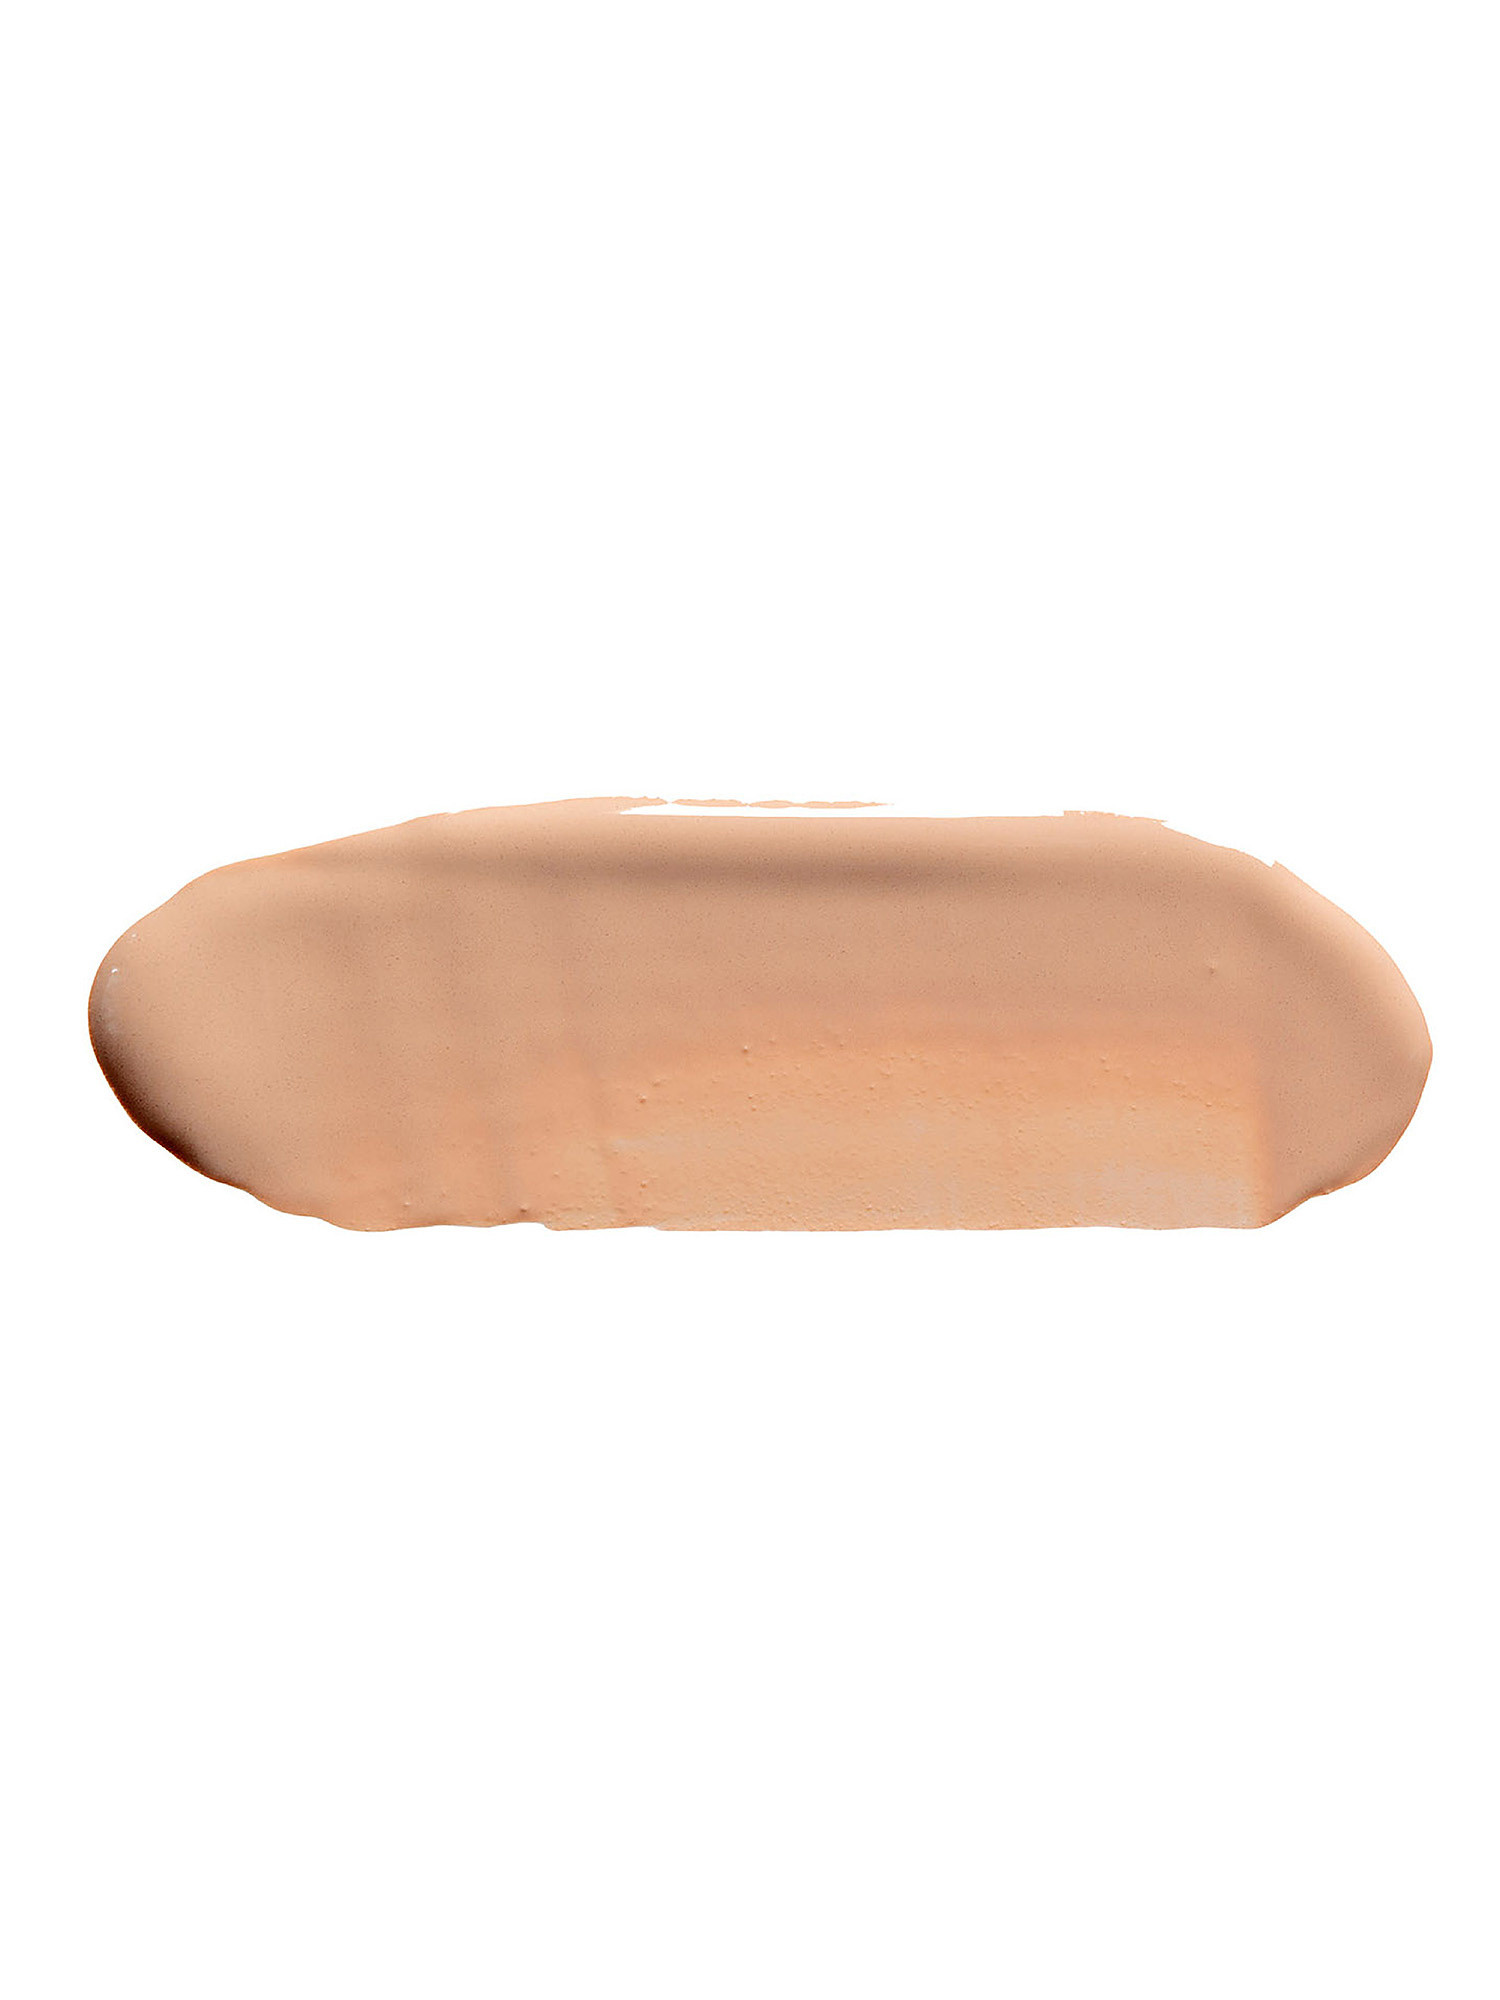 NUDISSIMO Naturally Matt Foundation - 246W, Natural, large image number 1